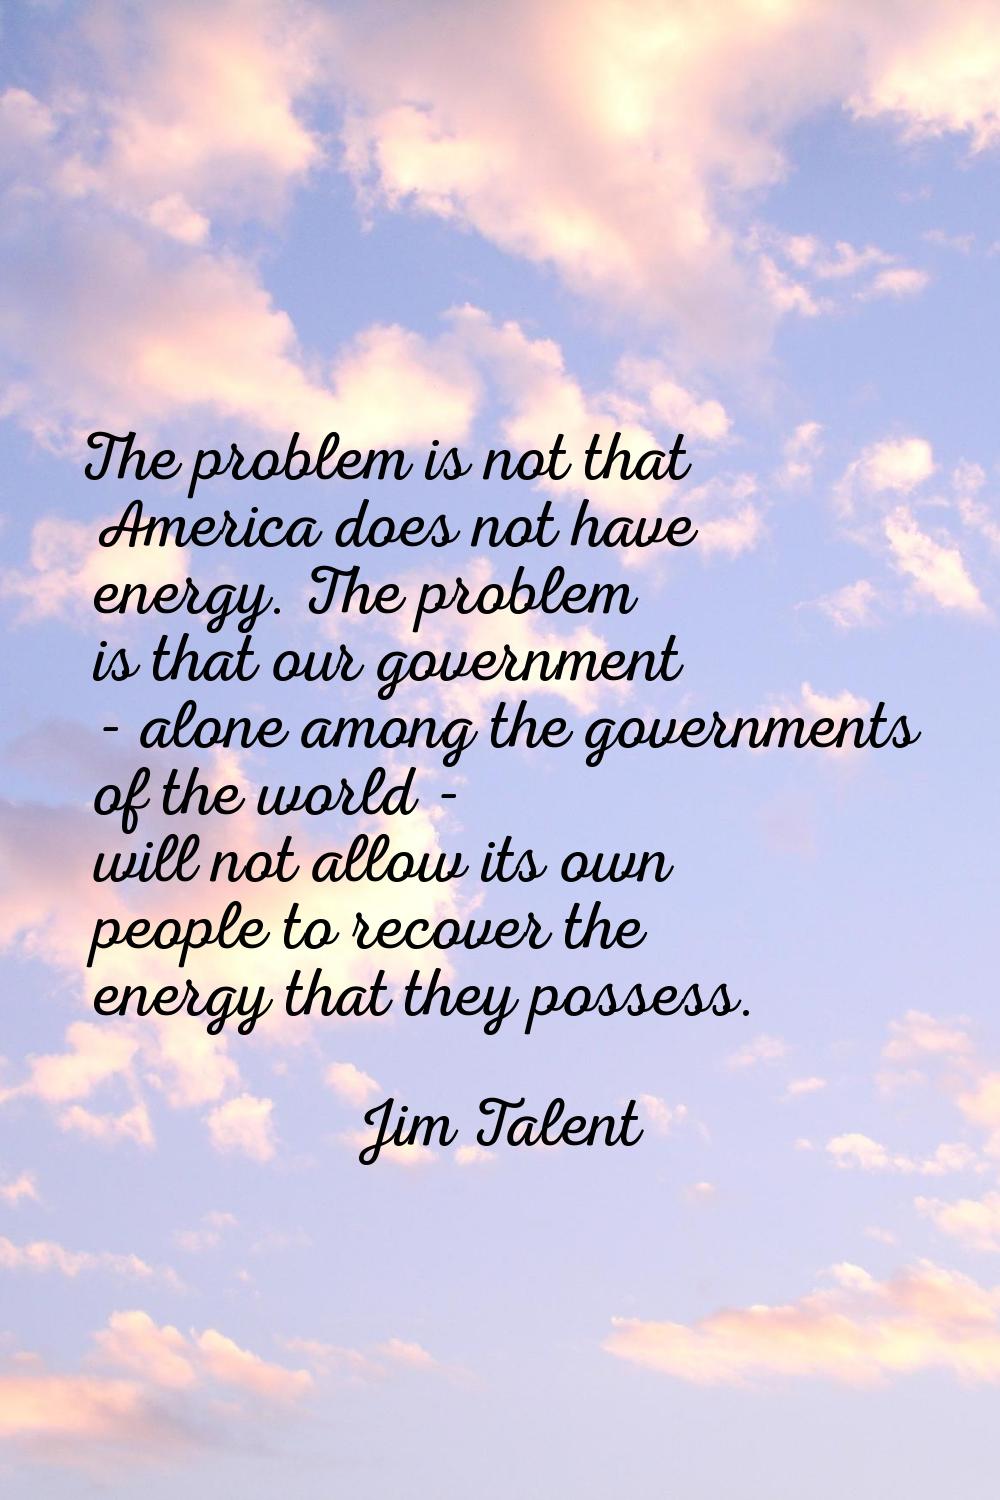 The problem is not that America does not have energy. The problem is that our government - alone am